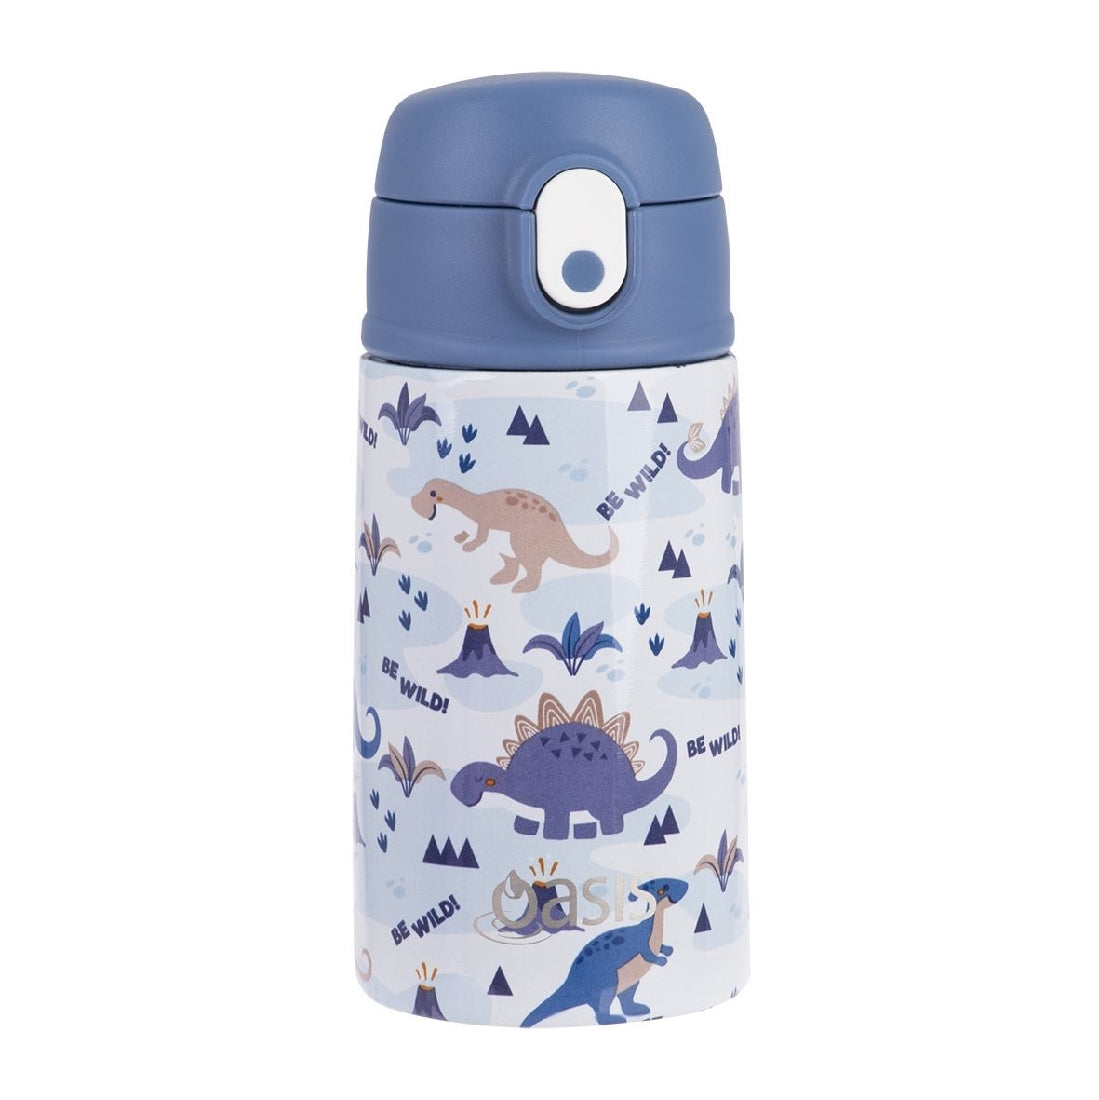 Oasis Stainless Steel Double Wall Insulated Kid's Drink Bottle W/ Sipper 400ml - Dinosaur Land